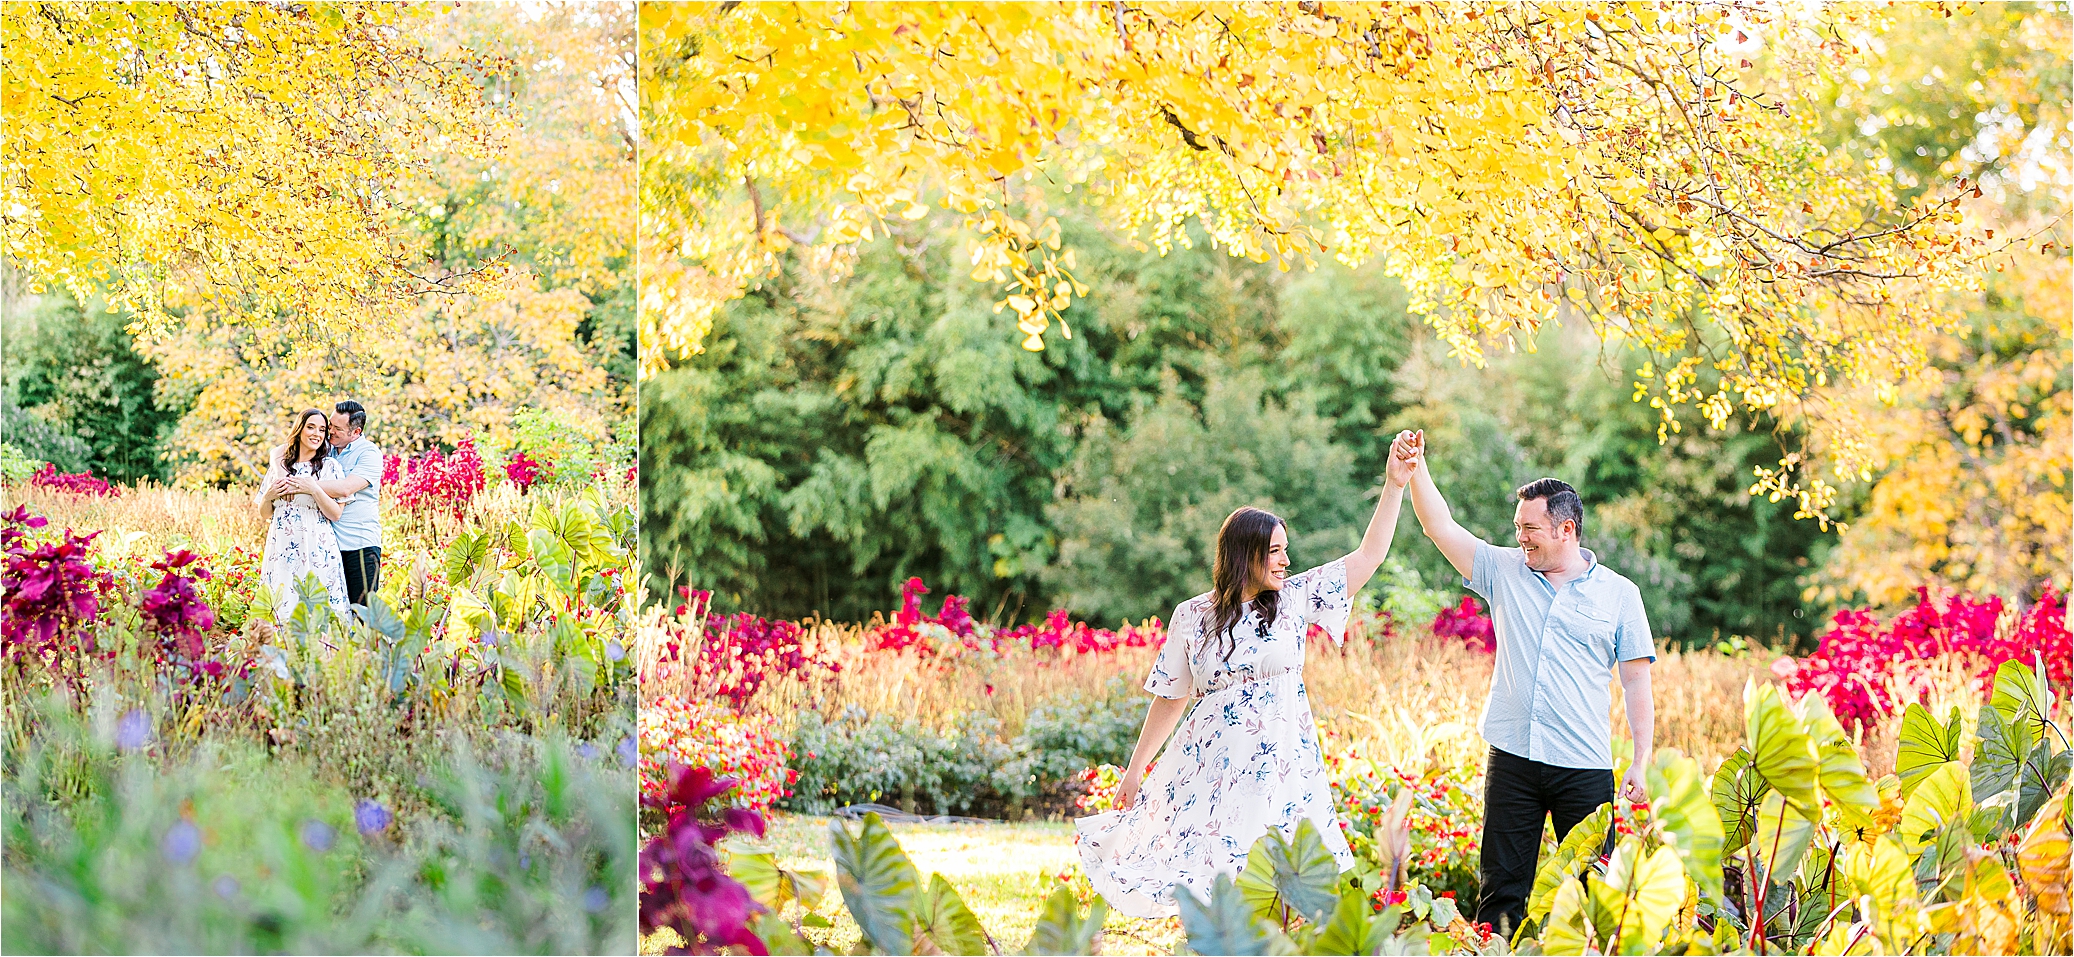 A couple dancing during their engagement session in a vibrant, color part of The Fort Worth Botanic Garden